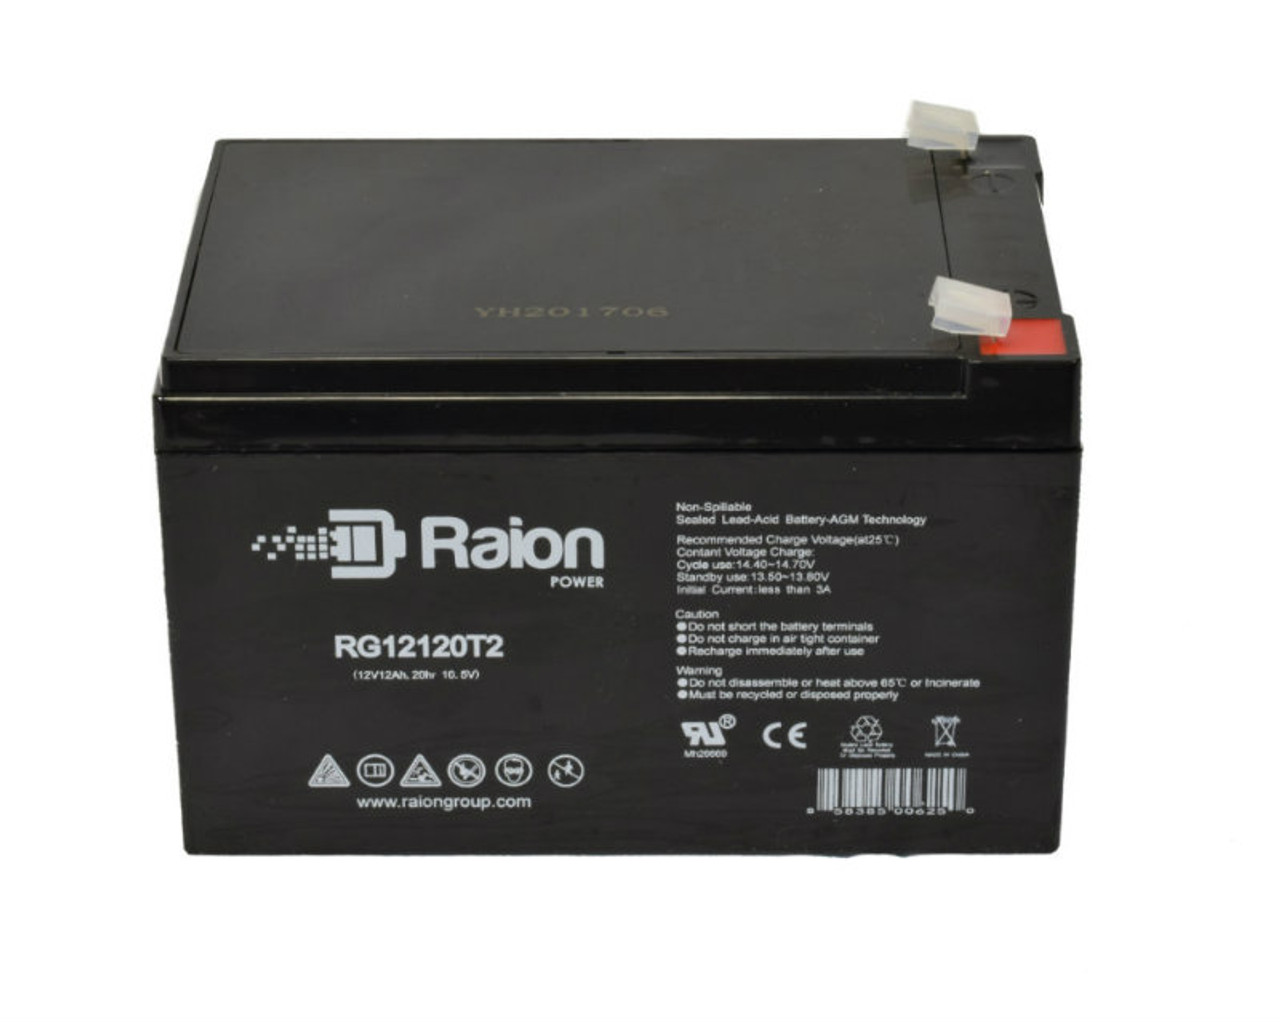 Raion Power RG12120T2 SLA Battery for Safety 1st Kid Trax Fire Engine